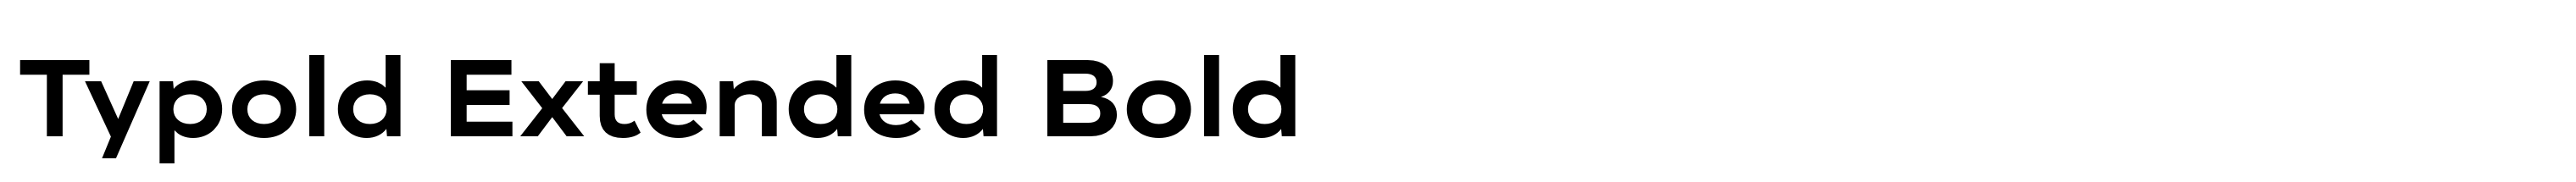 Typold Extended Bold